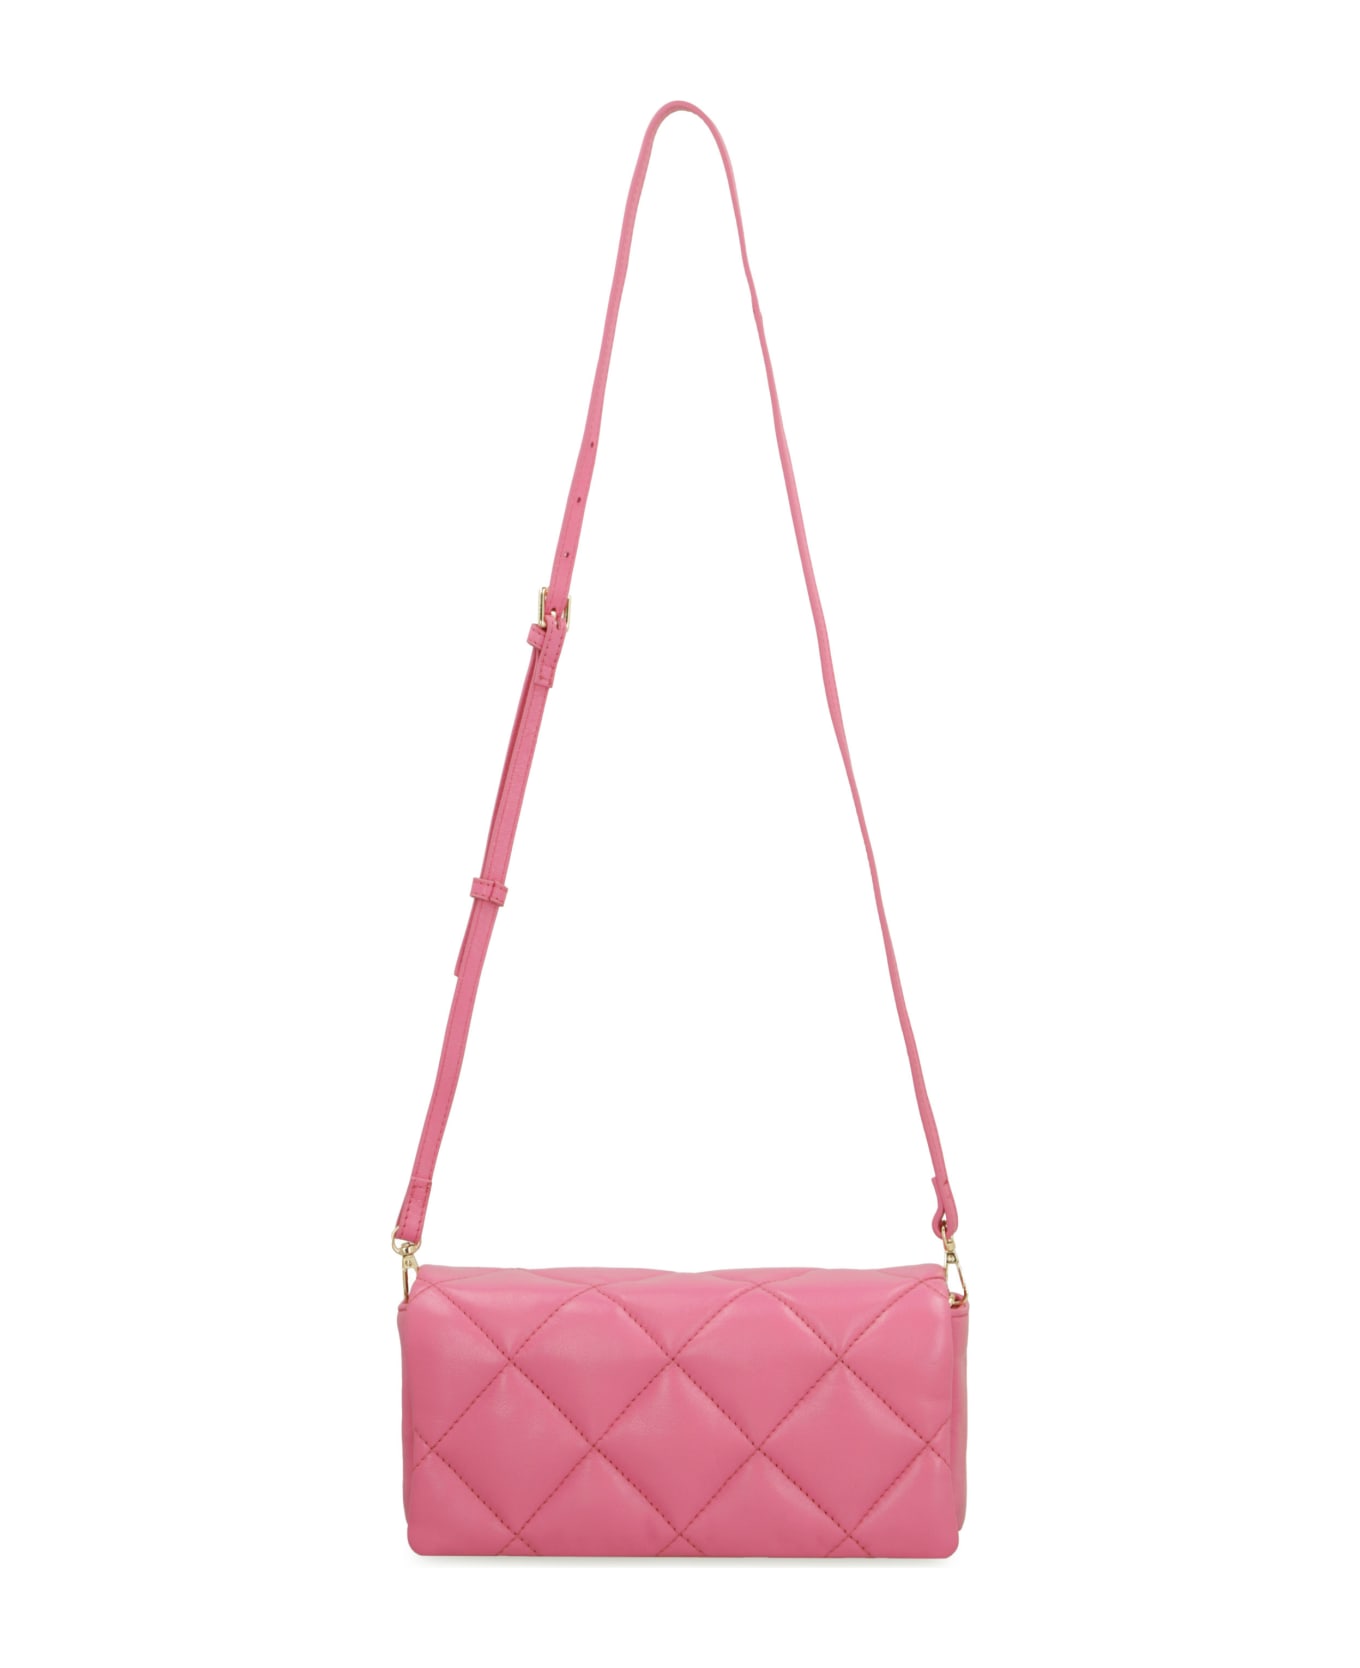 STAND STUDIO Hera Quilted Leather Bag - Fuchsia クラッチバッグ